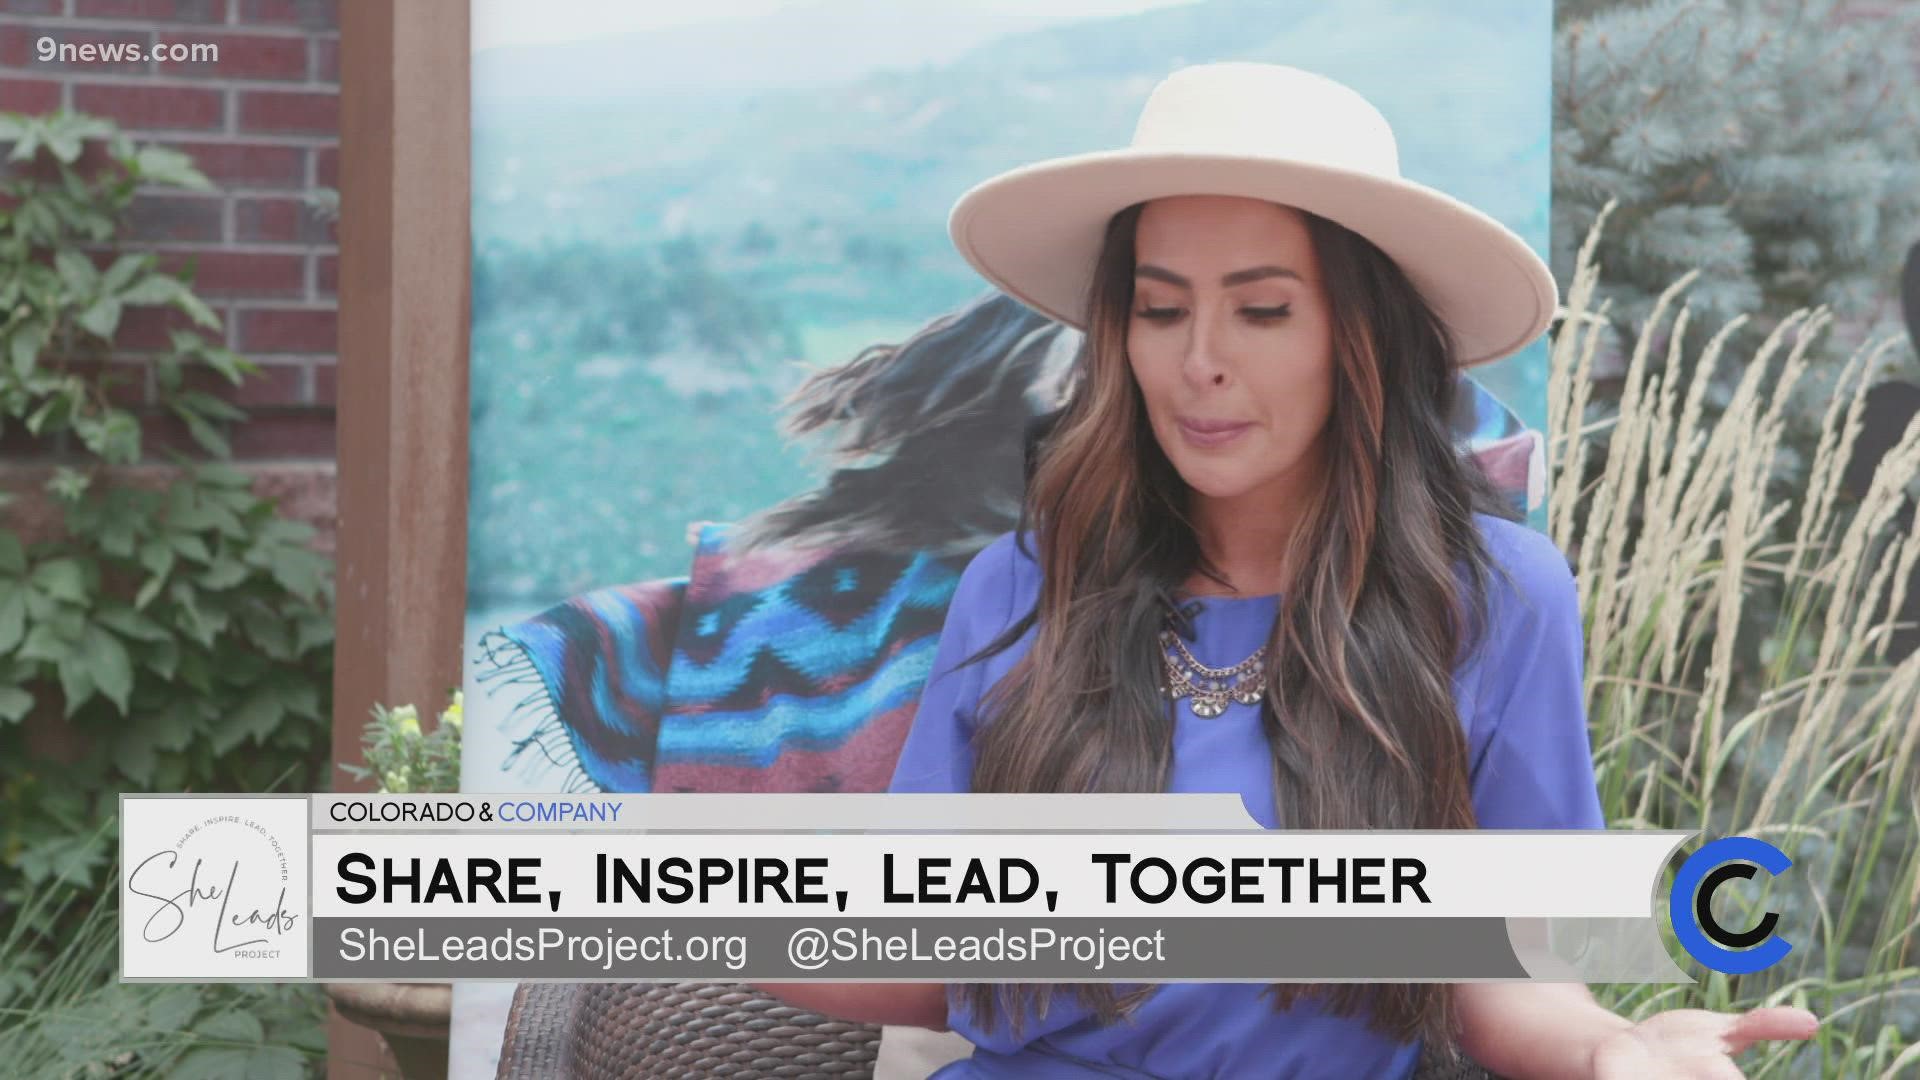 Learn more about the She Leads Project at SheLeadsProject.org.